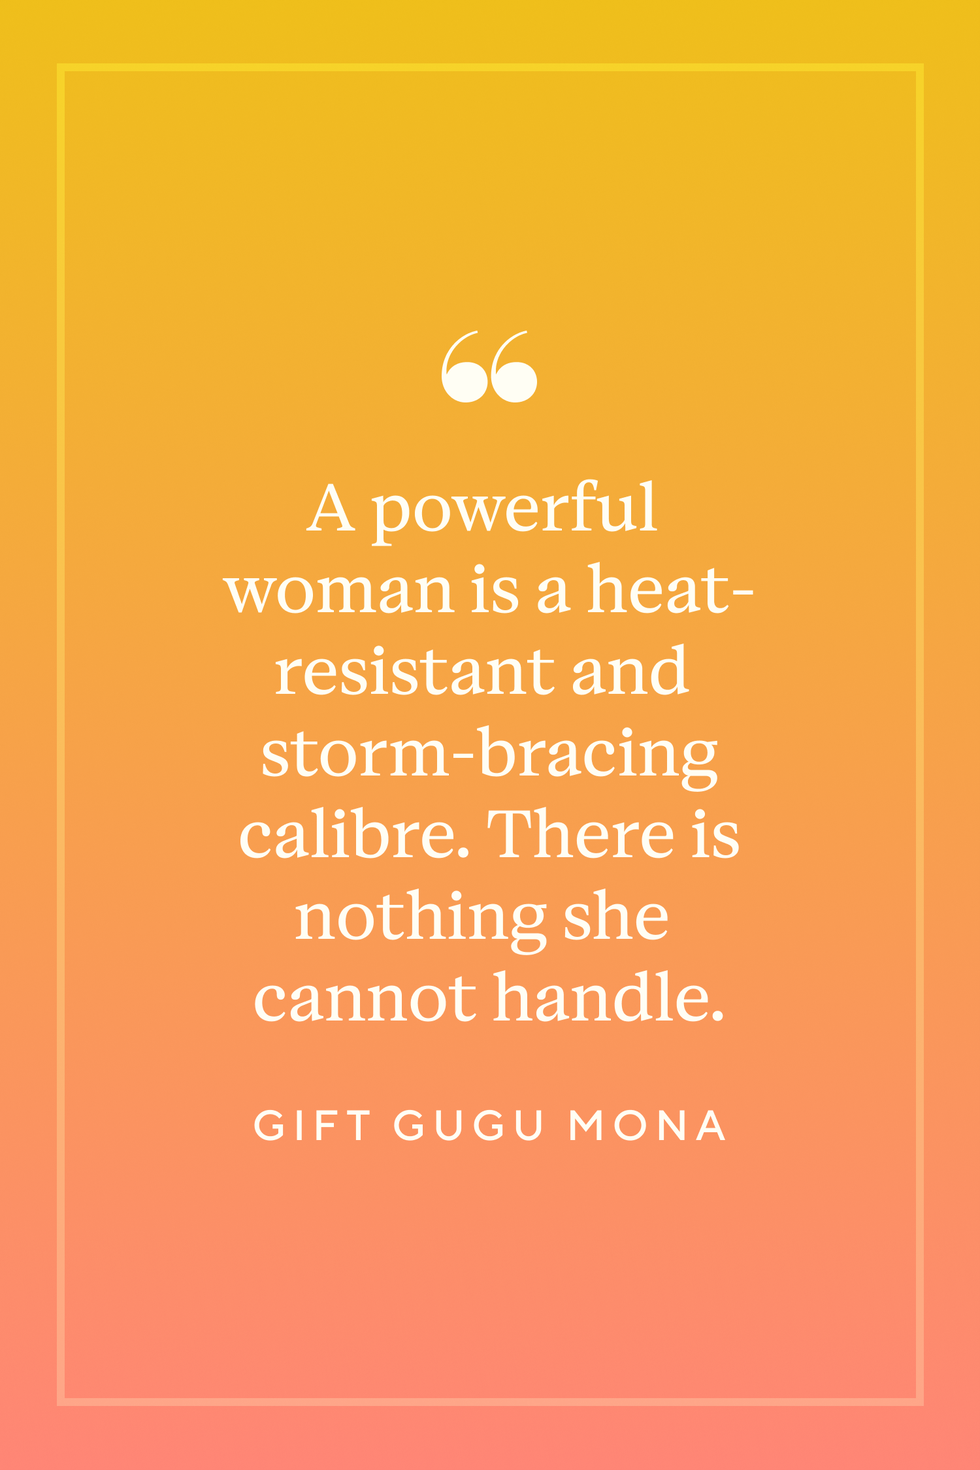 30 Powerful Women Empowerment Quotes to Celebrate 'Womanhood